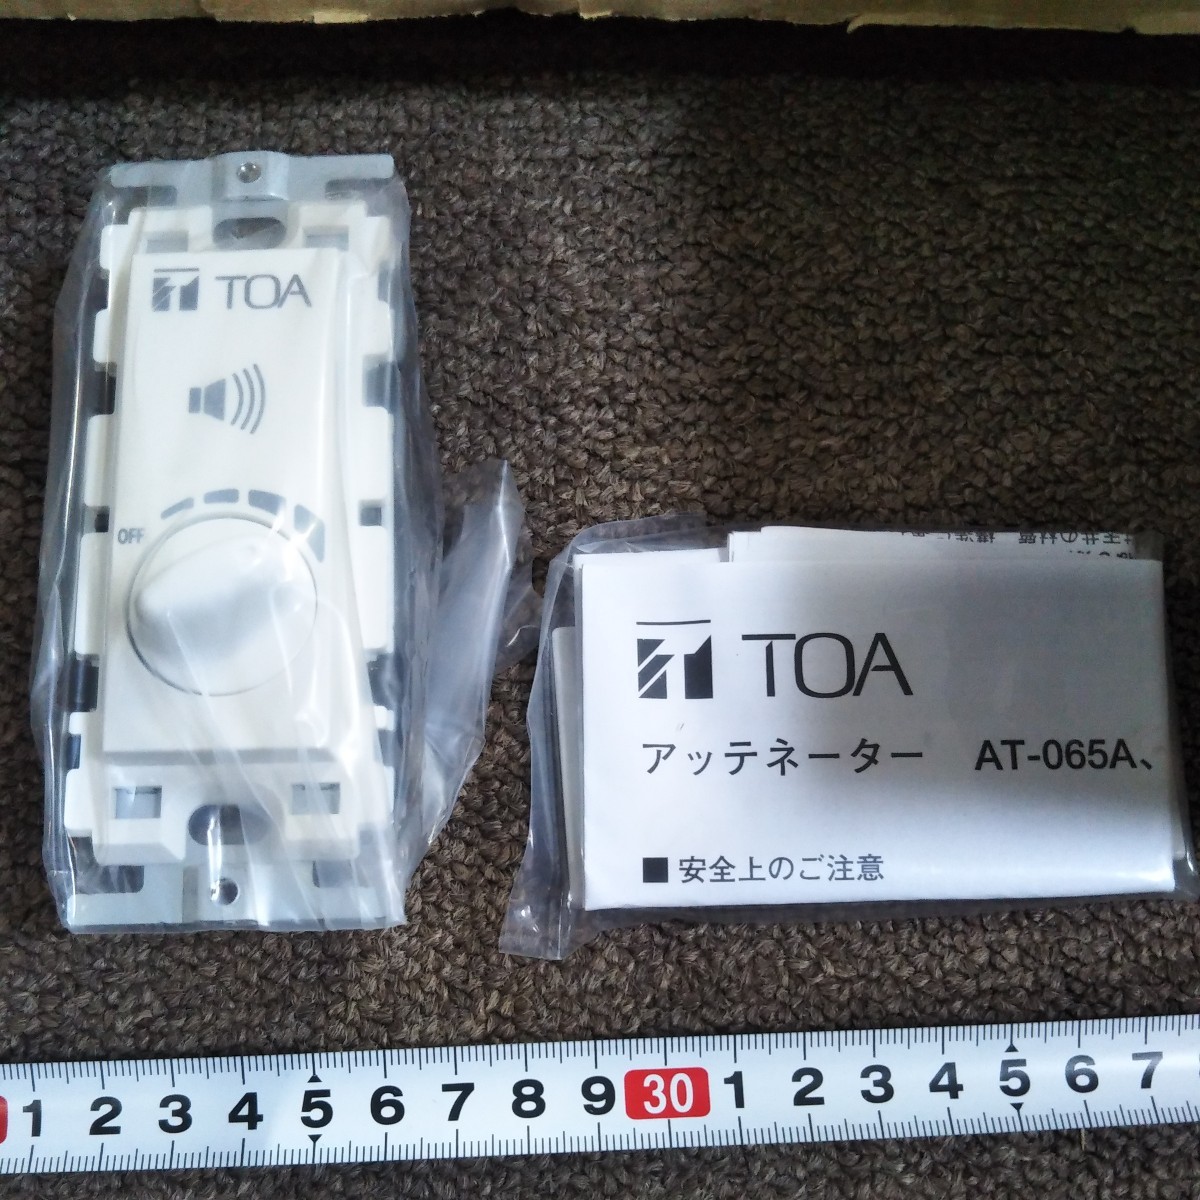 TOA AT-065A アッテネーター　音量調節機材12個セット♪　新品未使用品！_画像2